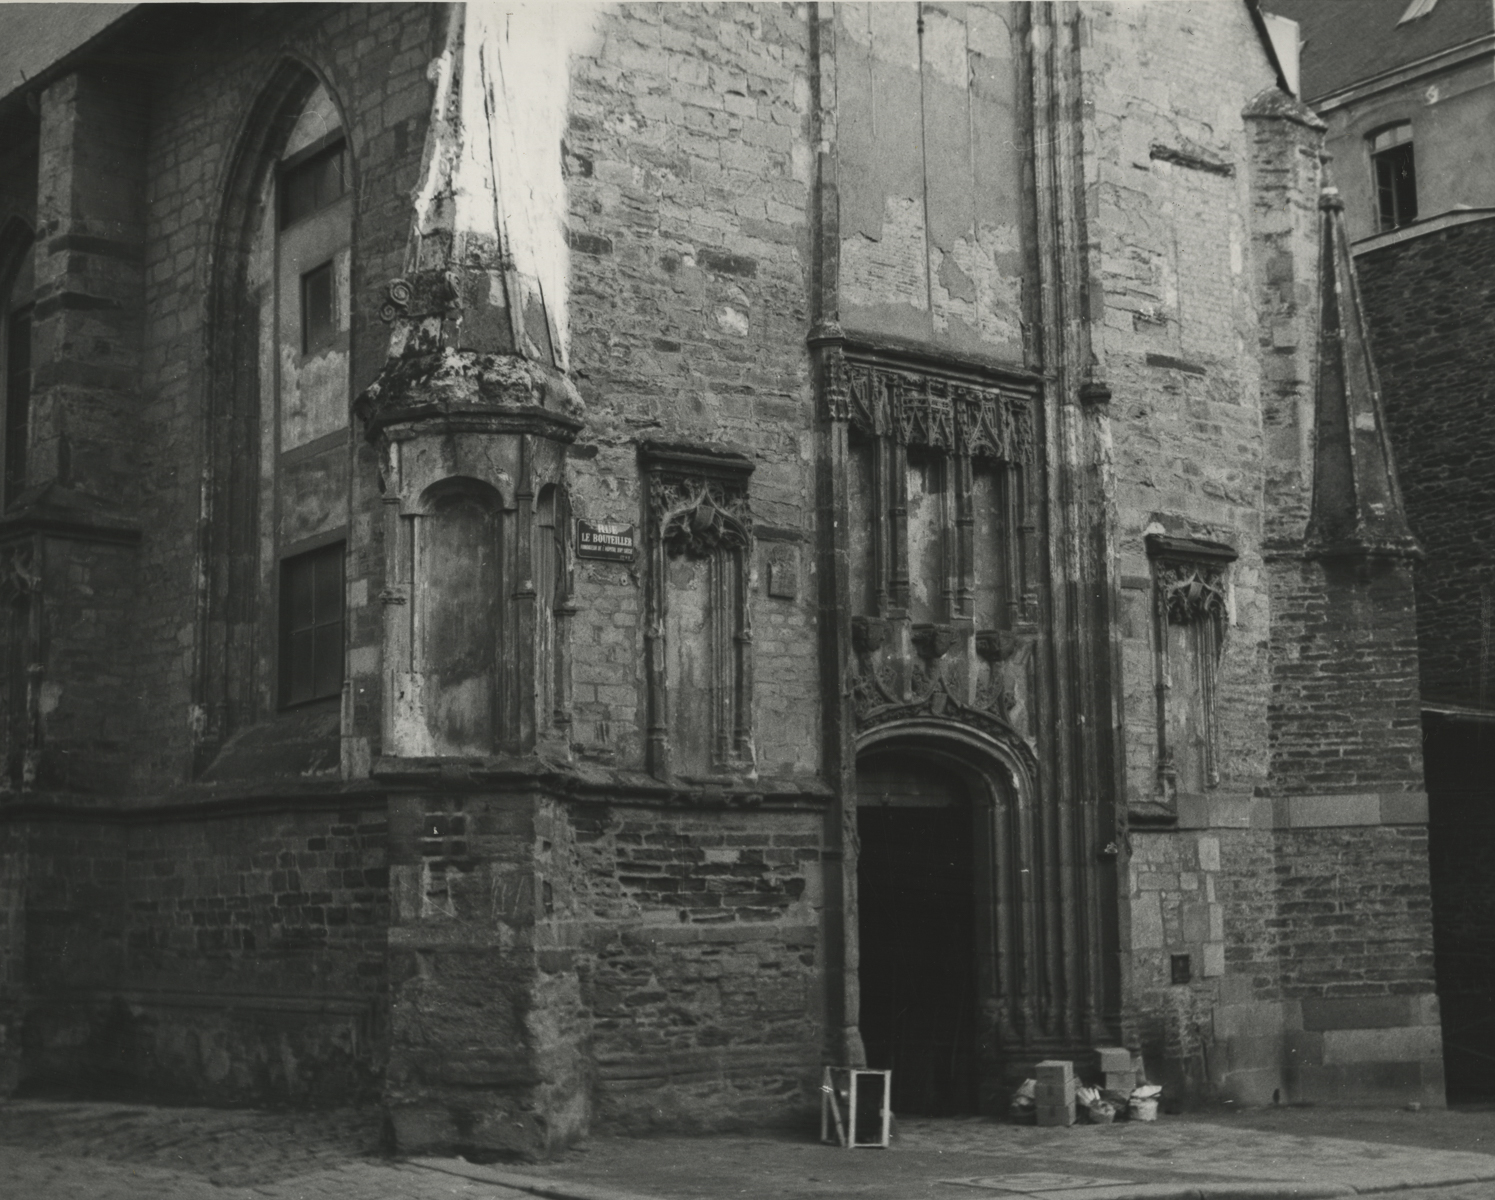 black and white photo of the front and entrance of an old brick building